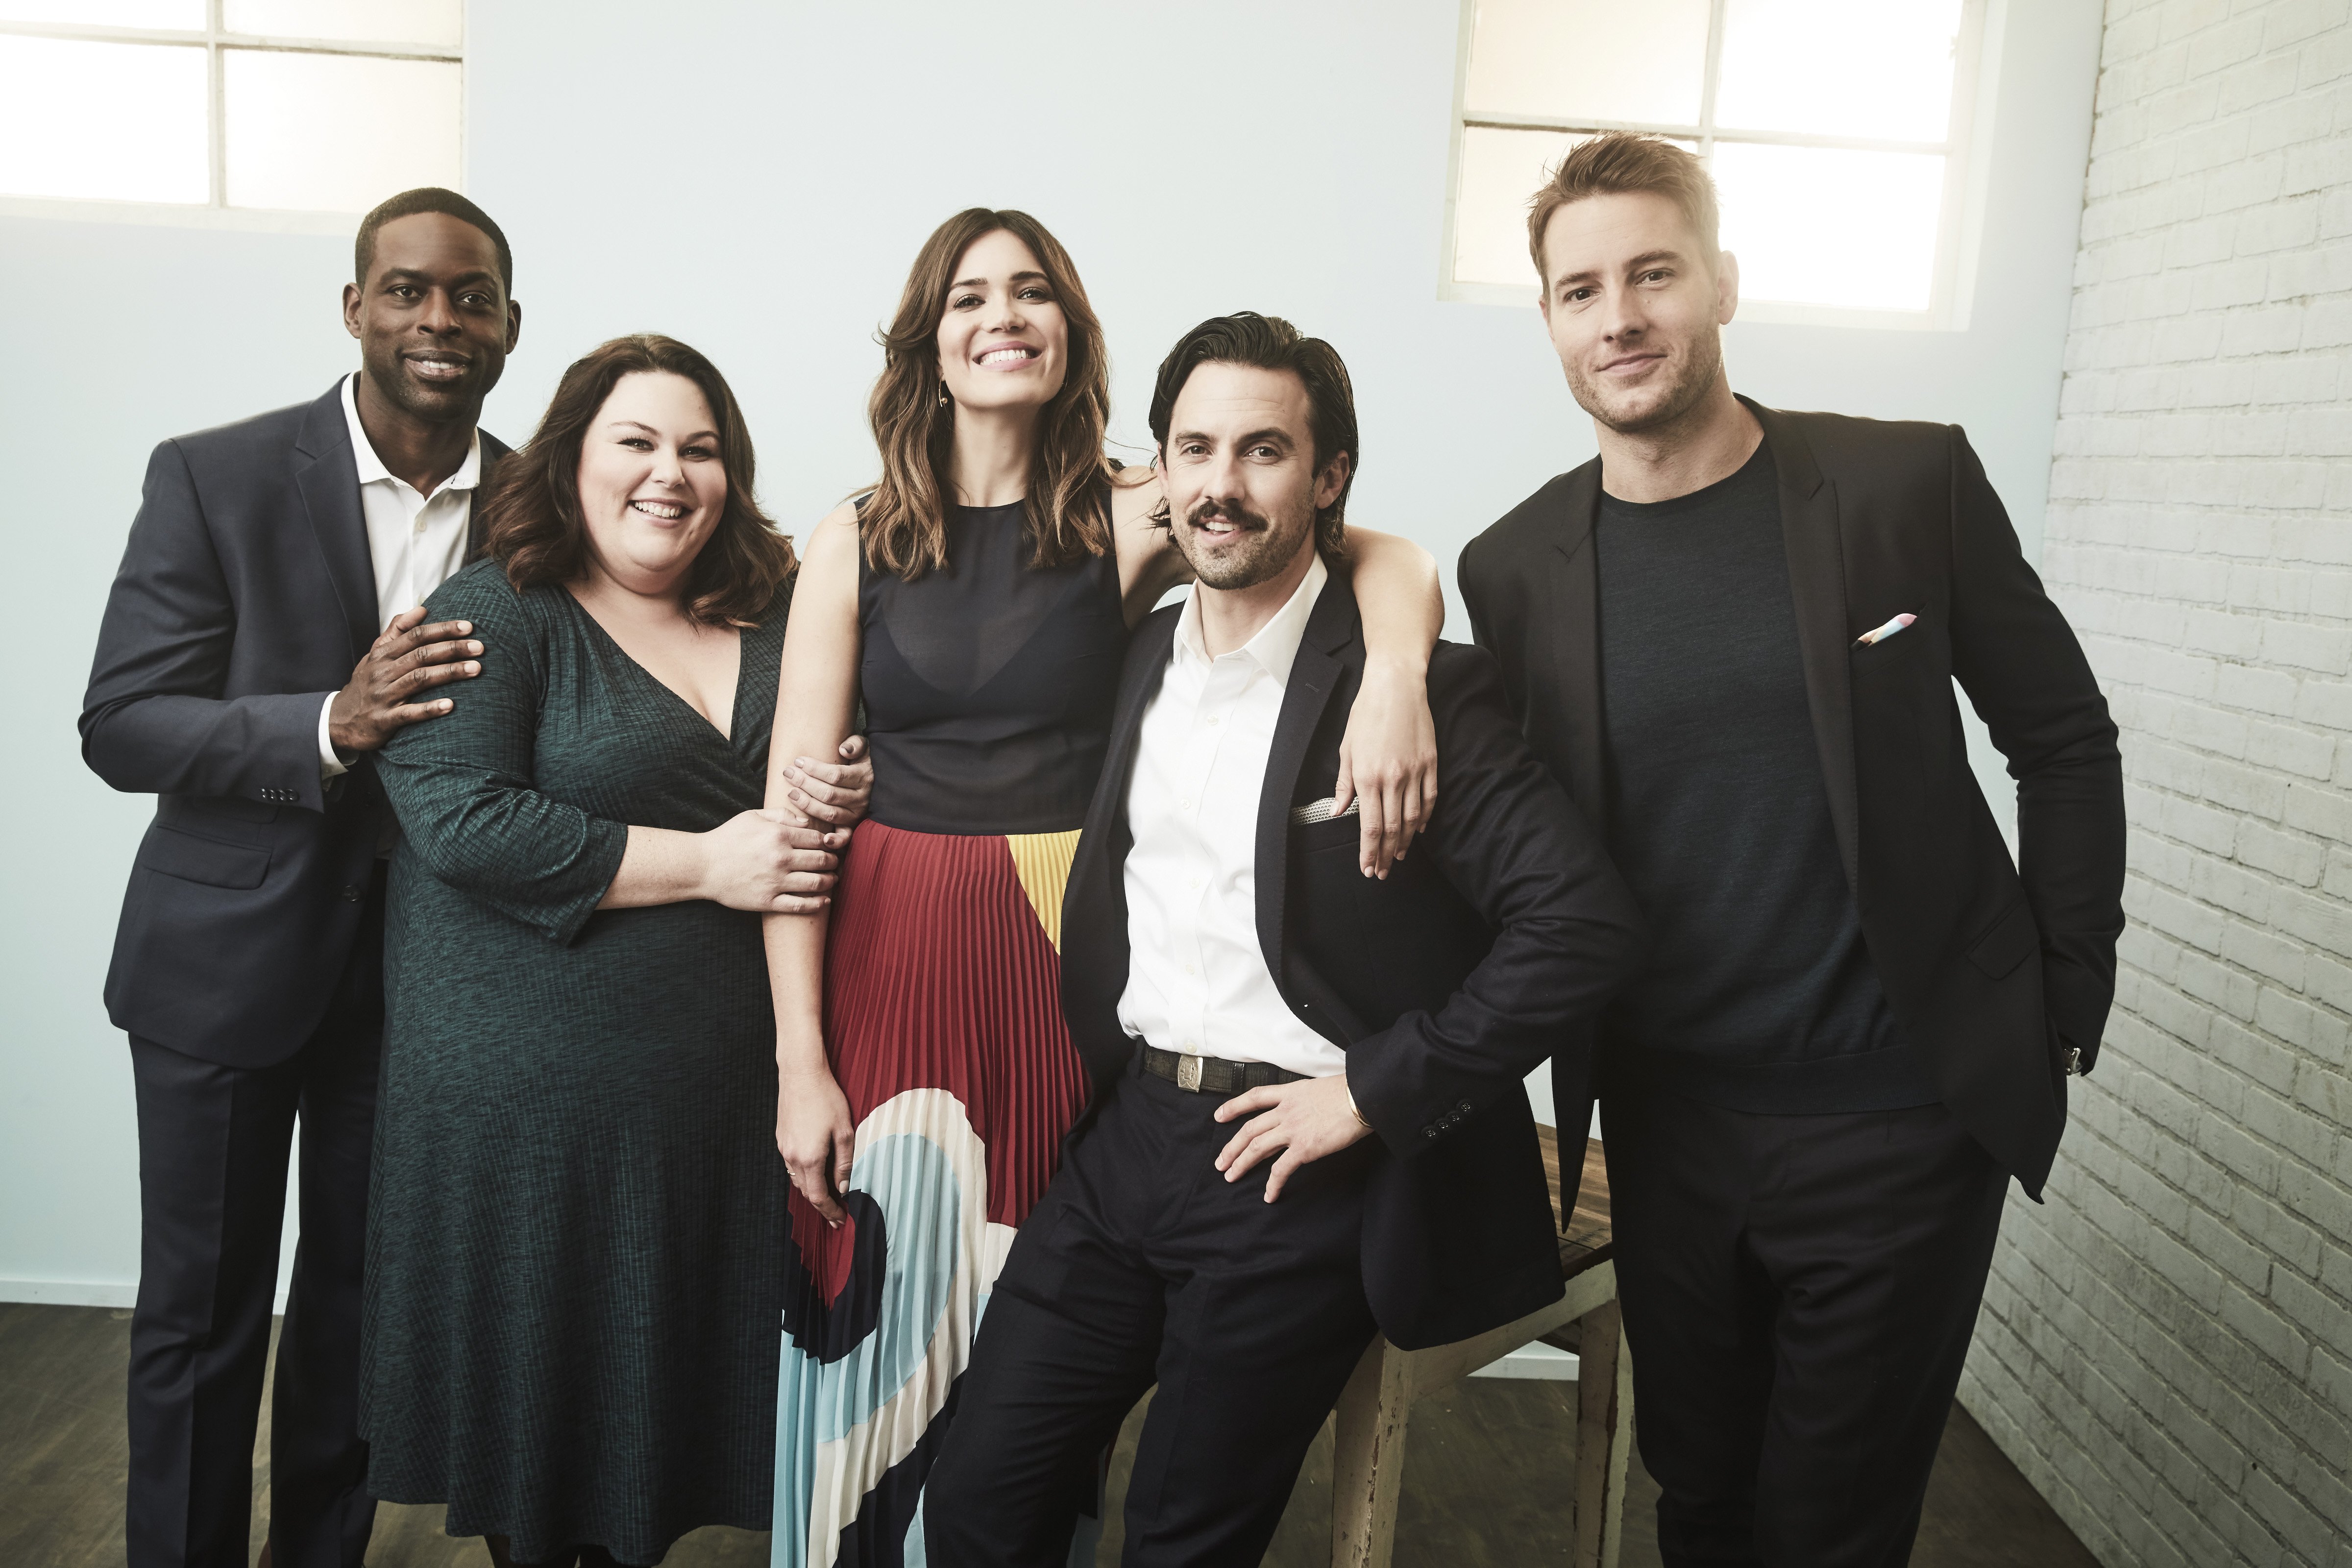 The cast of the "This Is Us" series pose during NBC Universal Press Tour in Pasadena, California on January 18, 2017 | Photo: Getty Images